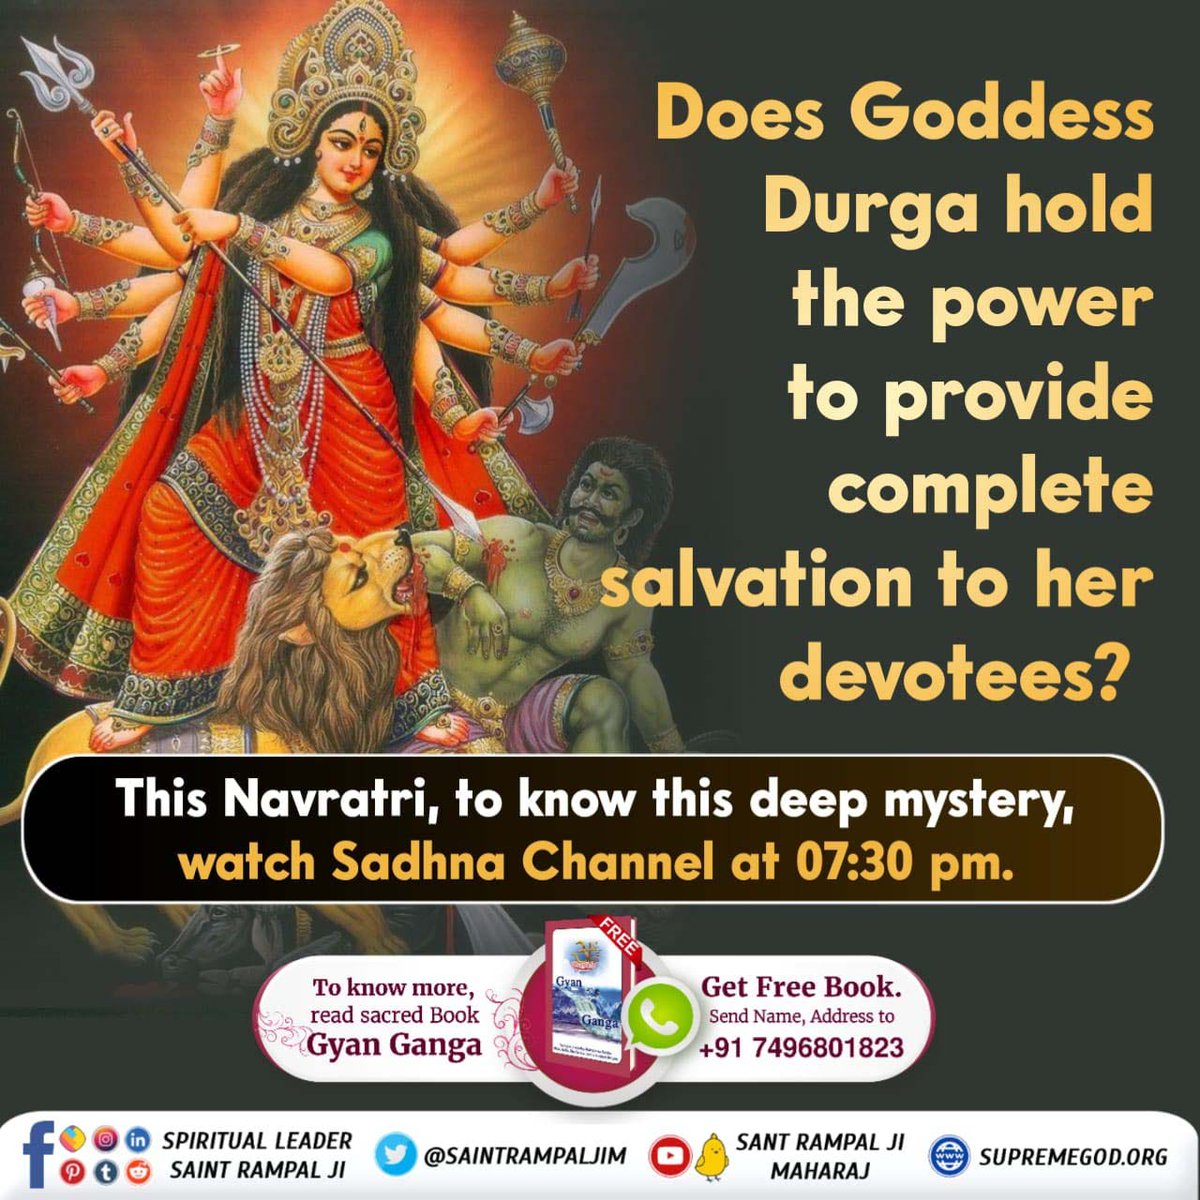 #देवी_मां_को_ऐसे_करें_प्रसन्न During Navratri,there is a tradition to worship nine forms of deity Durga for nine days.This practice is arbitrary. As Devi Durga is not the Supreme God.She also takes birth and dies. Read Gyan Ganga Download our Official App'Sant Rampal Ji Maharaj'